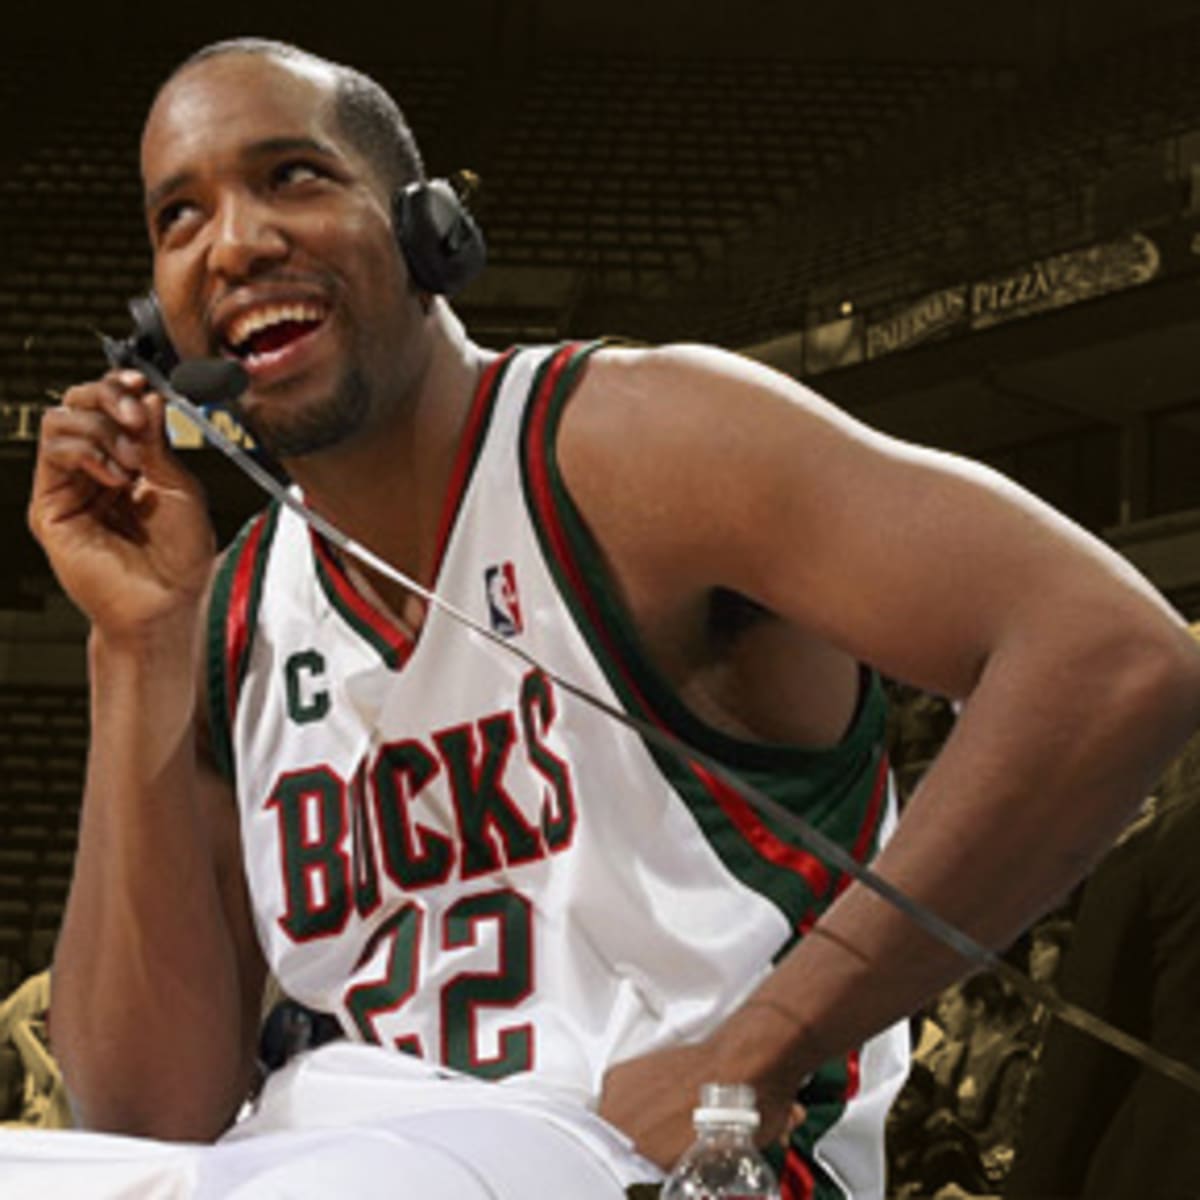 NBA Buzz - 16 years ago today, Michael Redd went